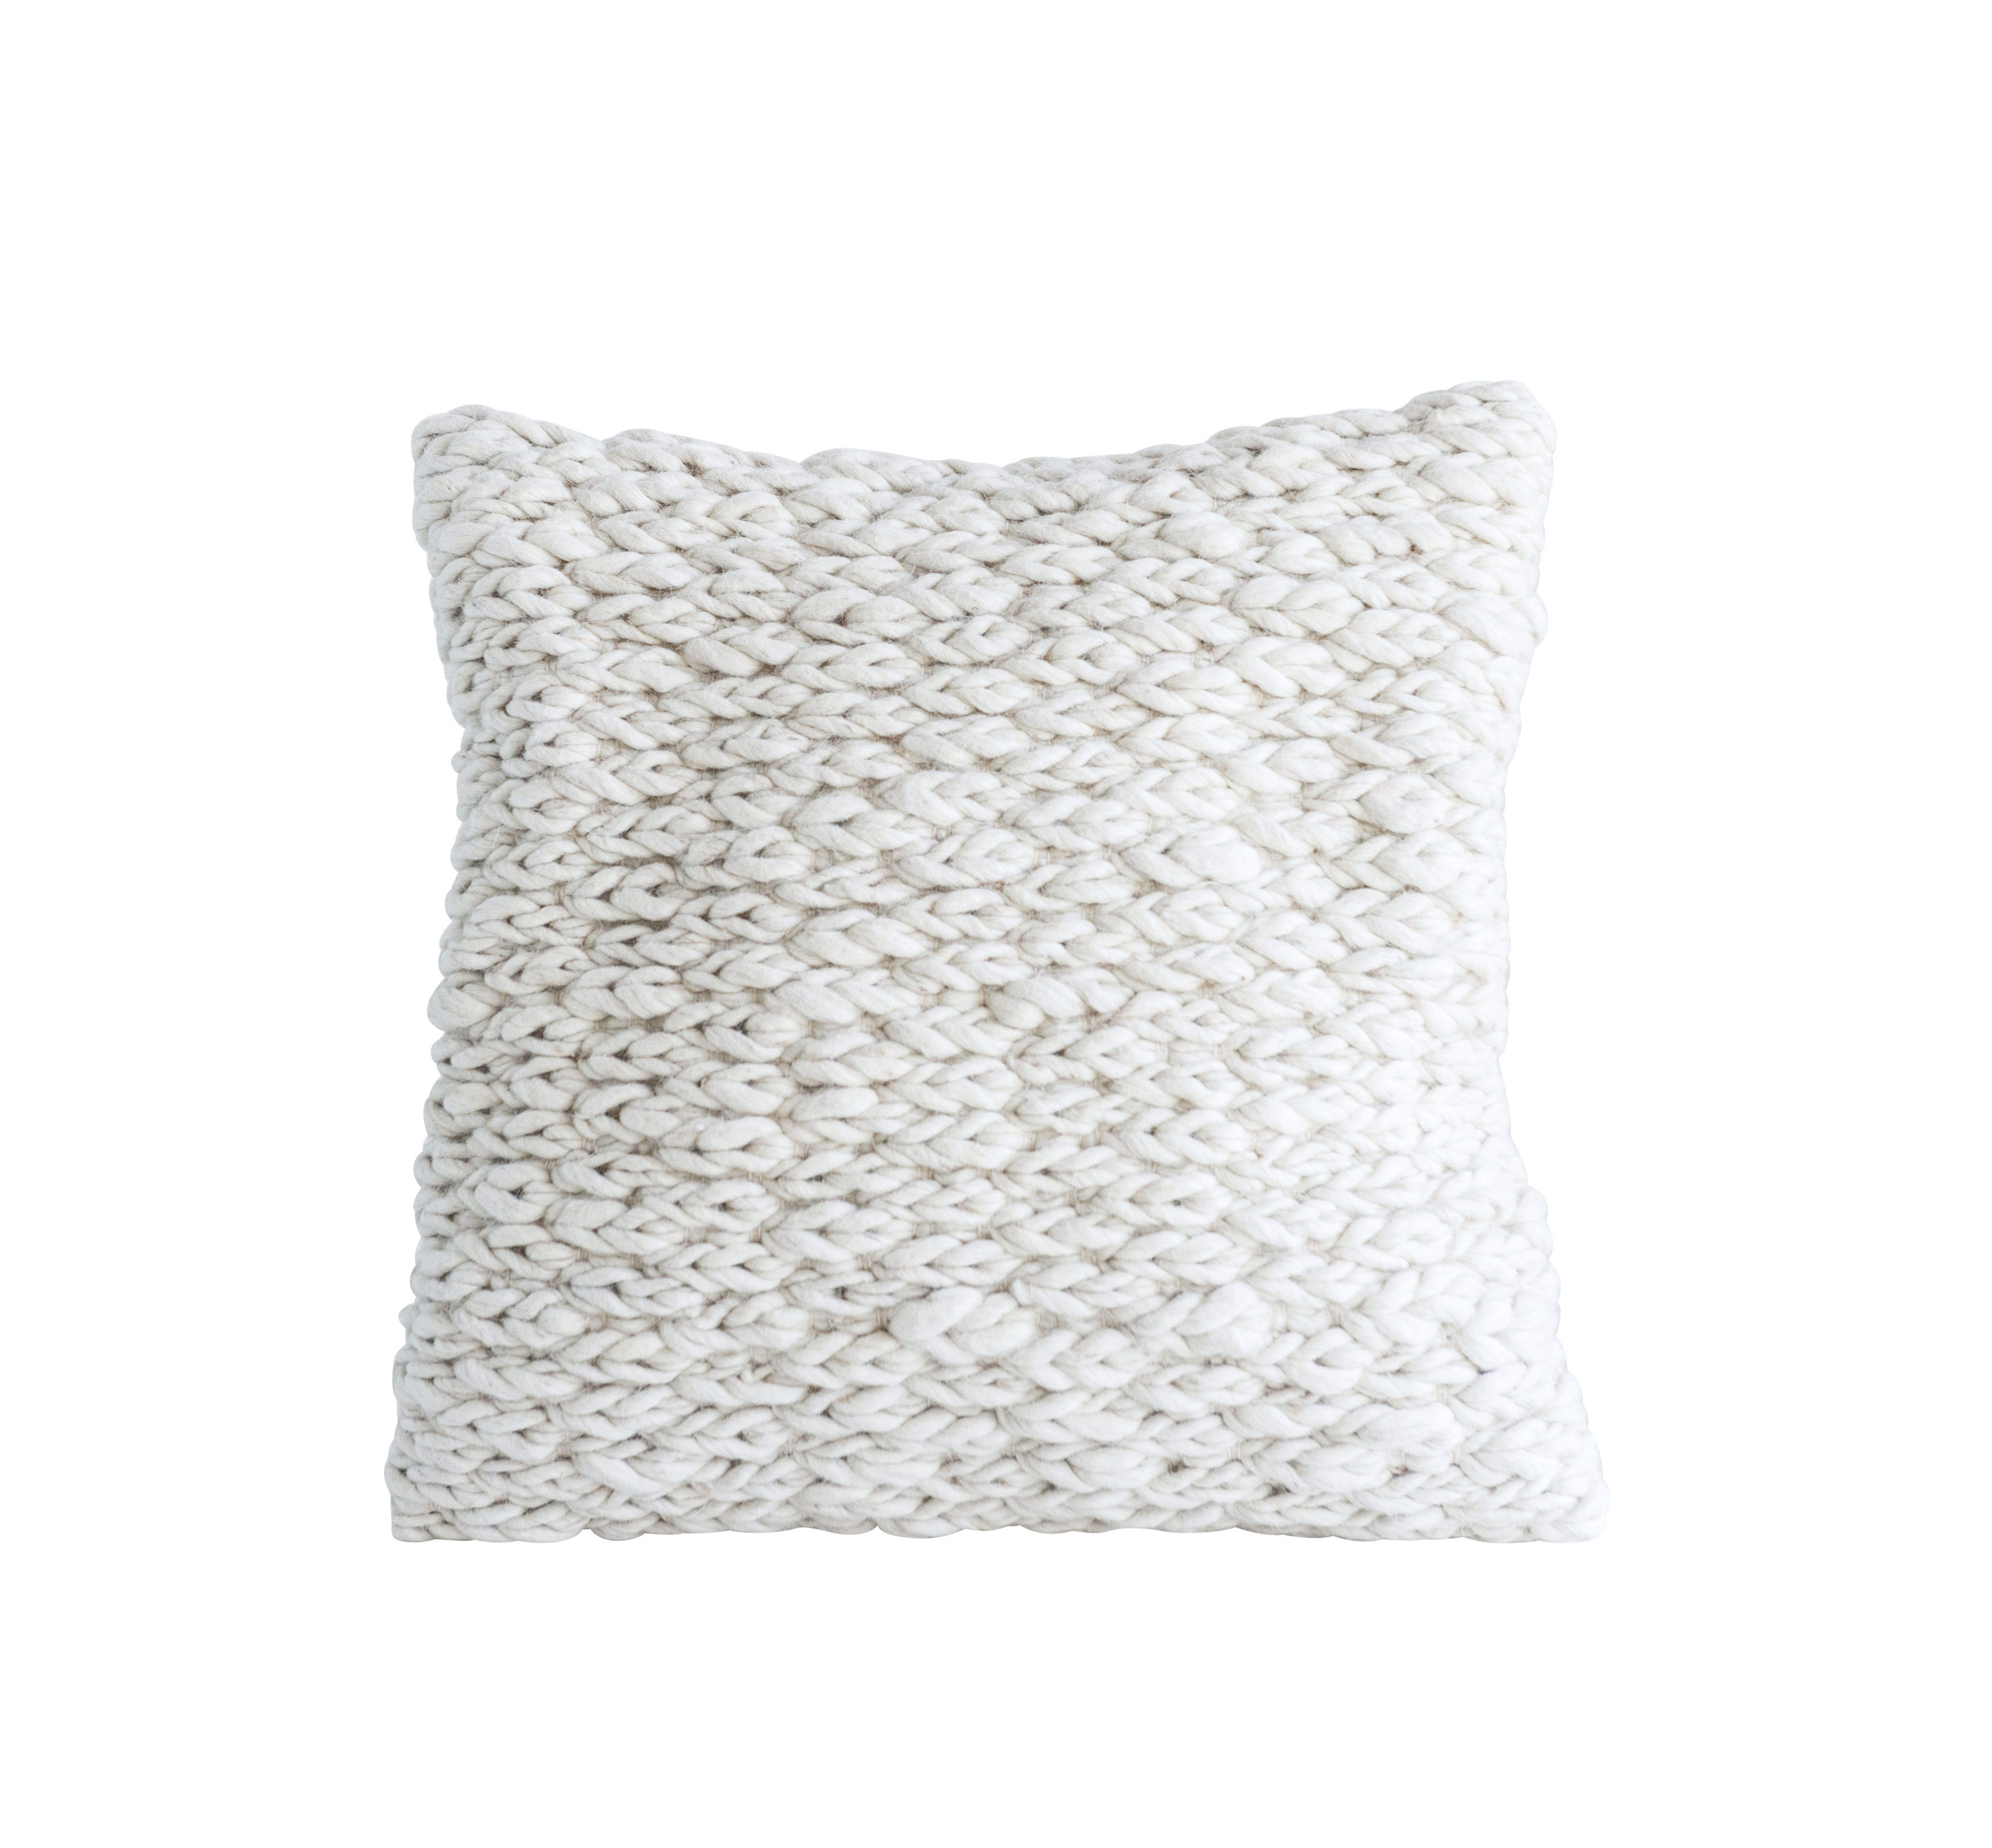 Square Off-White Wool Pillow with Thick Cable Knit Design - Moss & Wilder